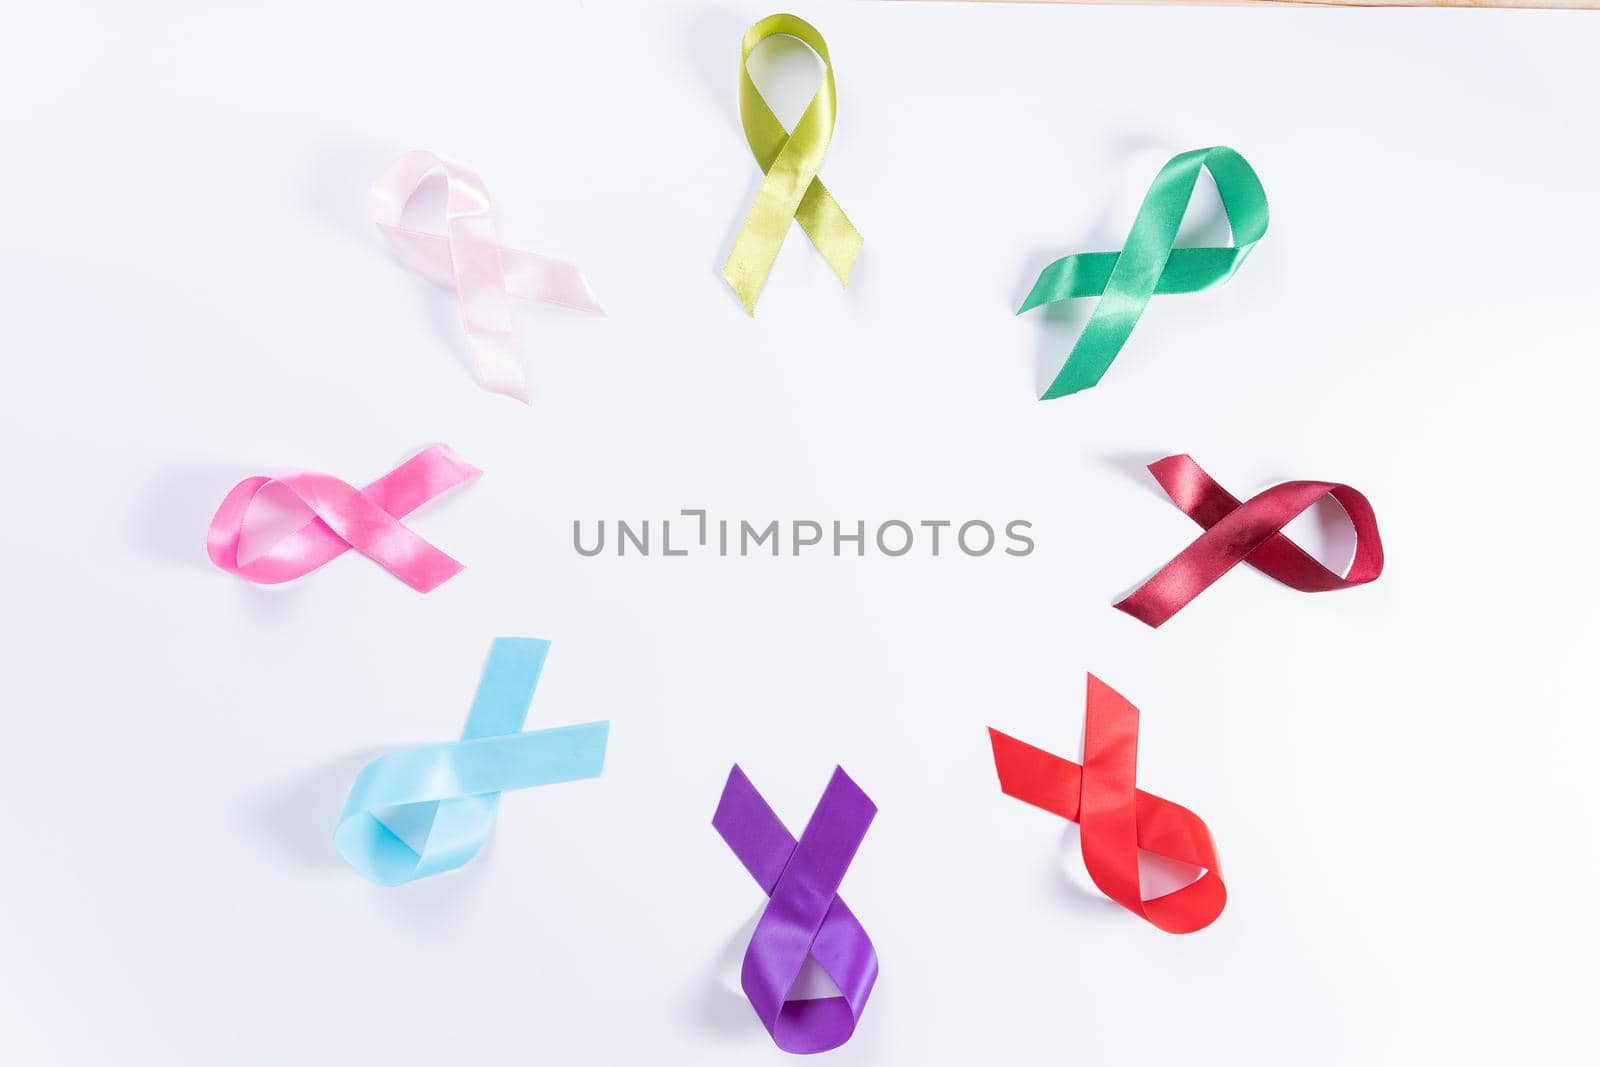 World cancer day, colorful ribbon cancer awareness on with background with copy space for text. Healthcare and medical concept.